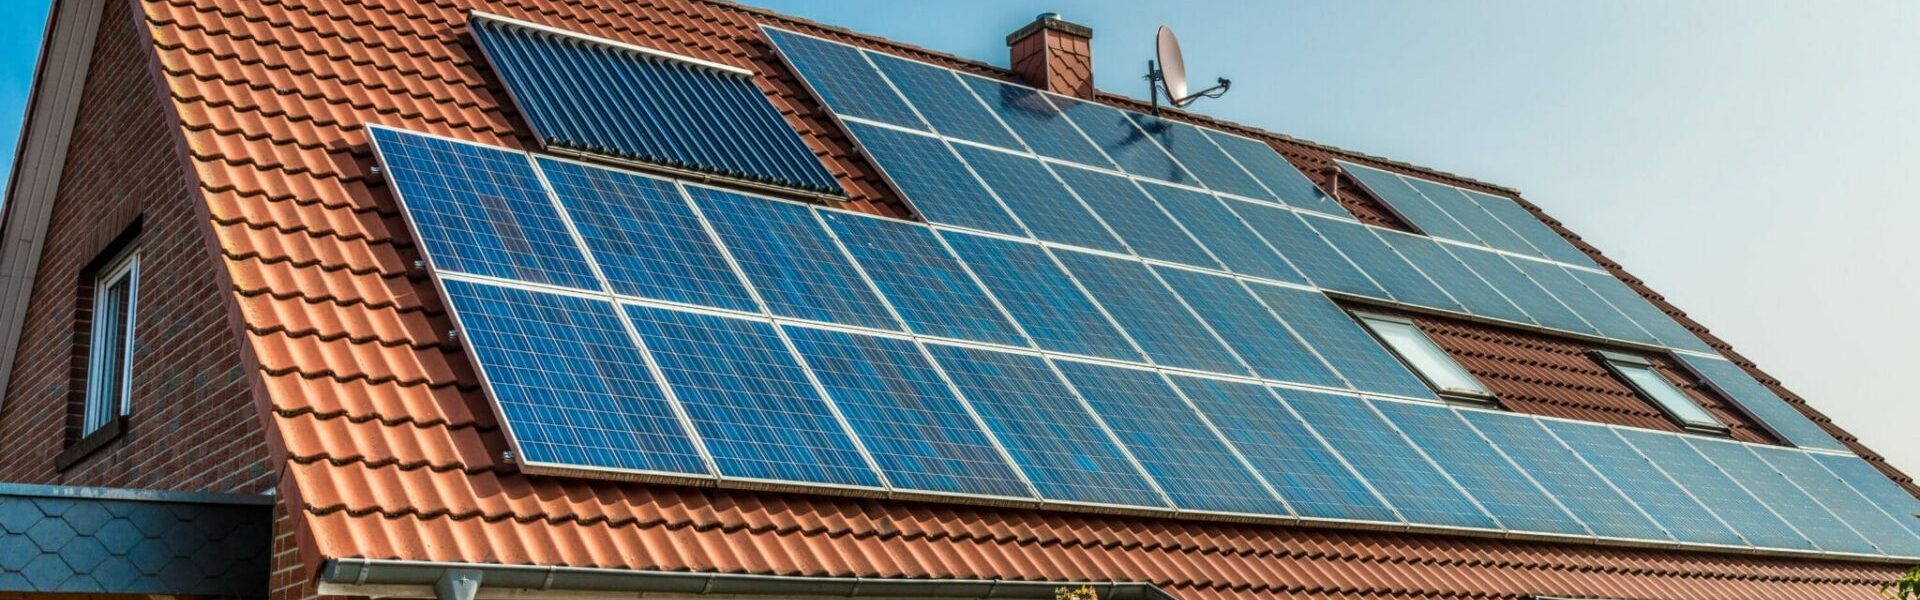 What is commercial purpose solar energy?